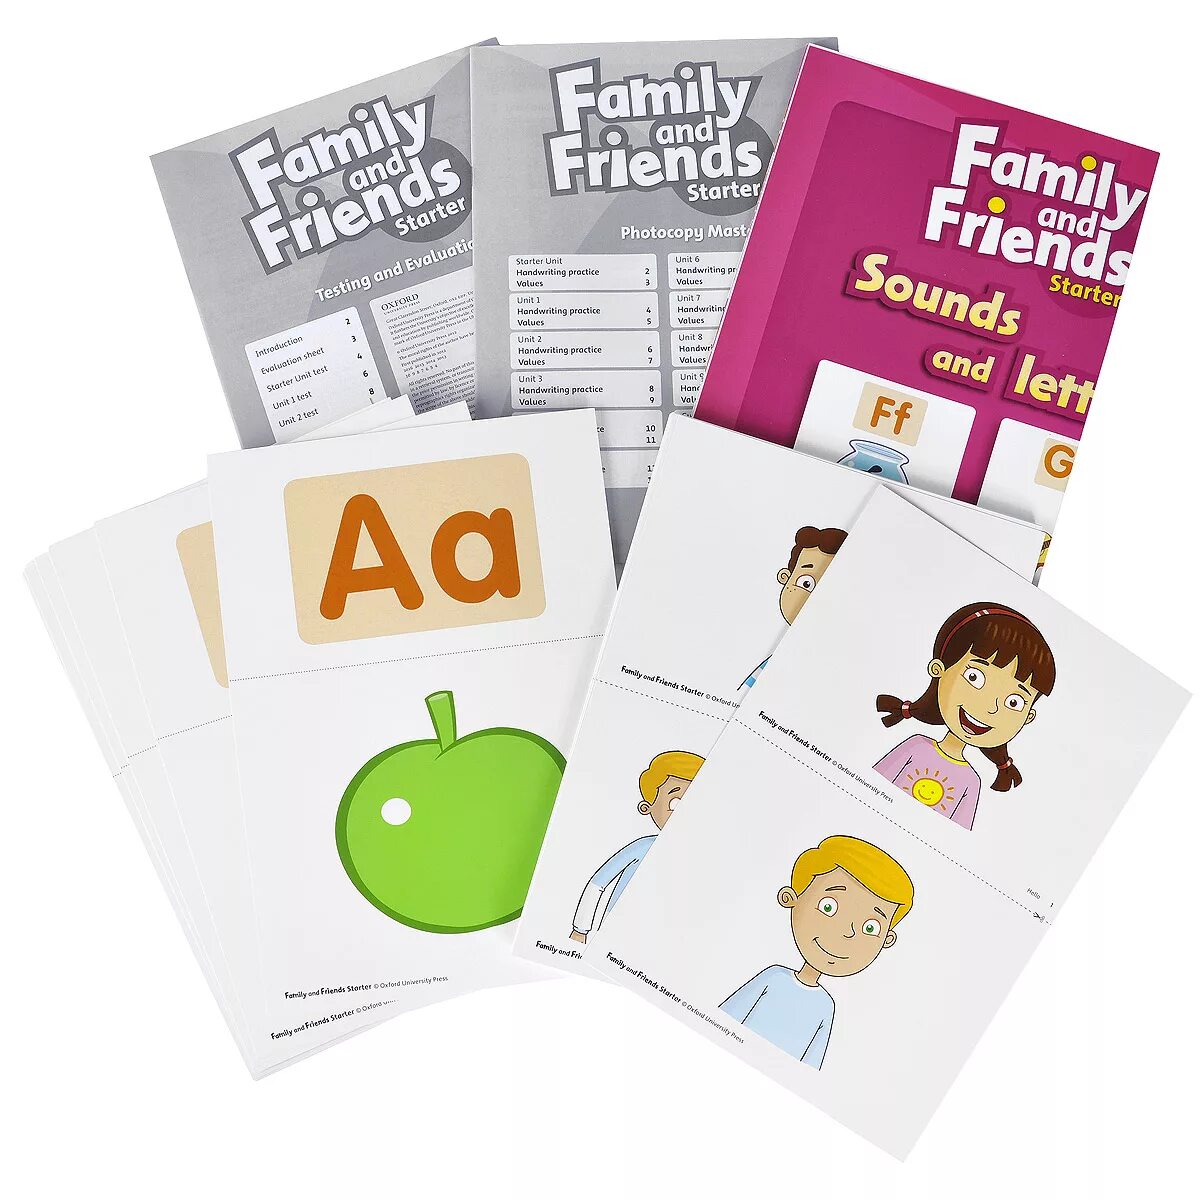 Family and friends students. Family and friends: Starter. Фэмили френдс стартер. УМК Family and friends. Family and friends Starter карточки.